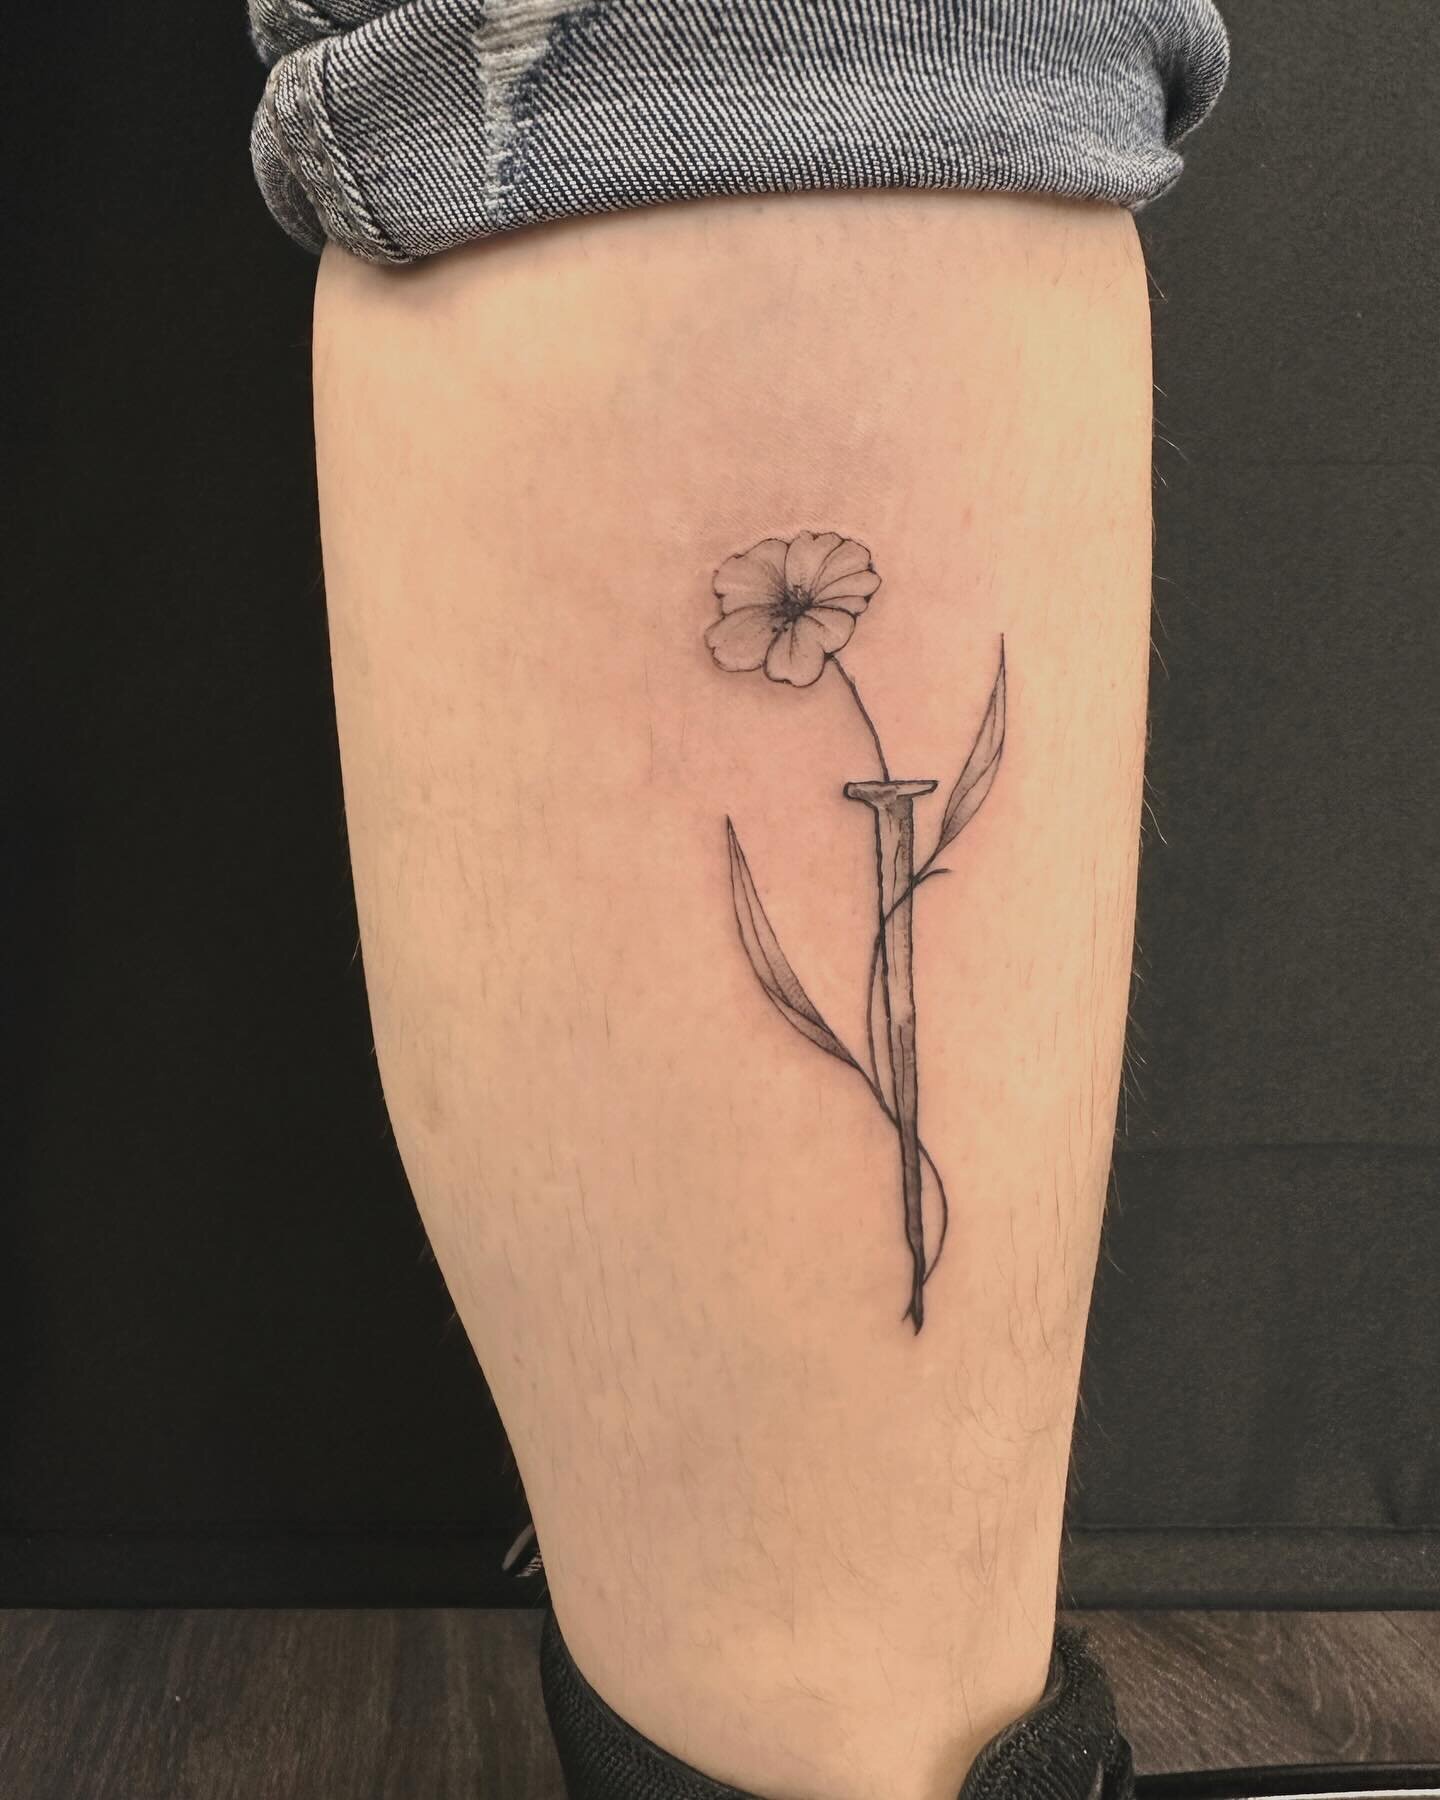 ⚜️leg adornment⚜️
Thanks so much for coming in!
.
.
.
.
.
.
.
.
.
. 
#tattoo #finelinetattoo #pagan #witchy